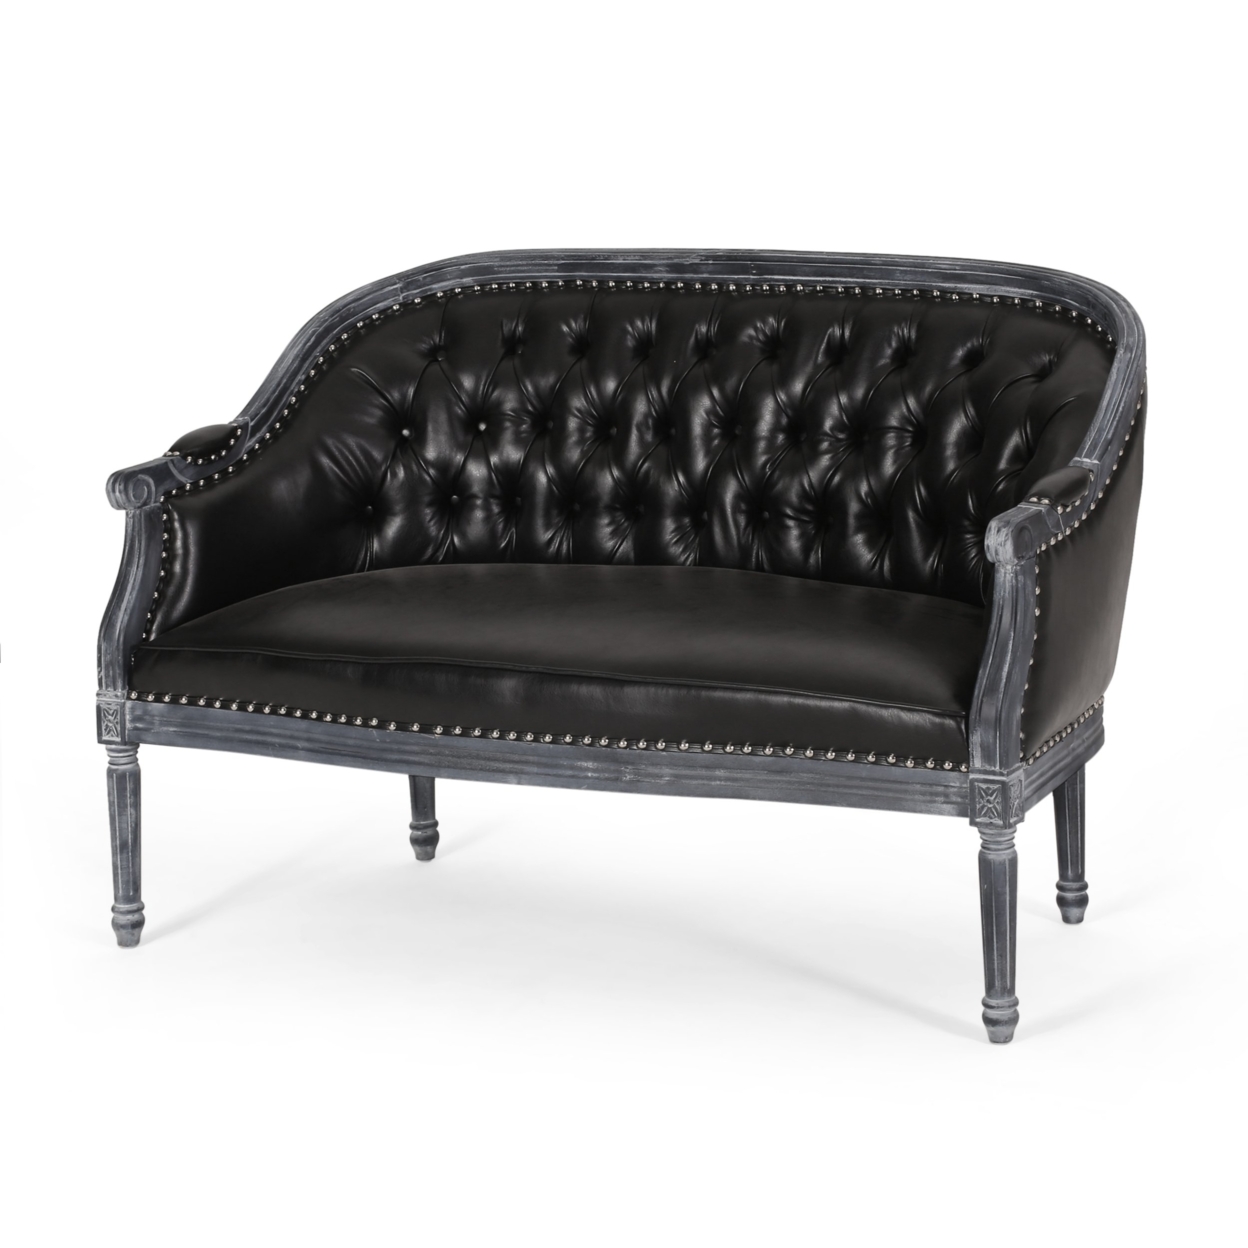 Megan Traditional Tufted Upholstered Loveseat - Grey/midnight, Faux Leather